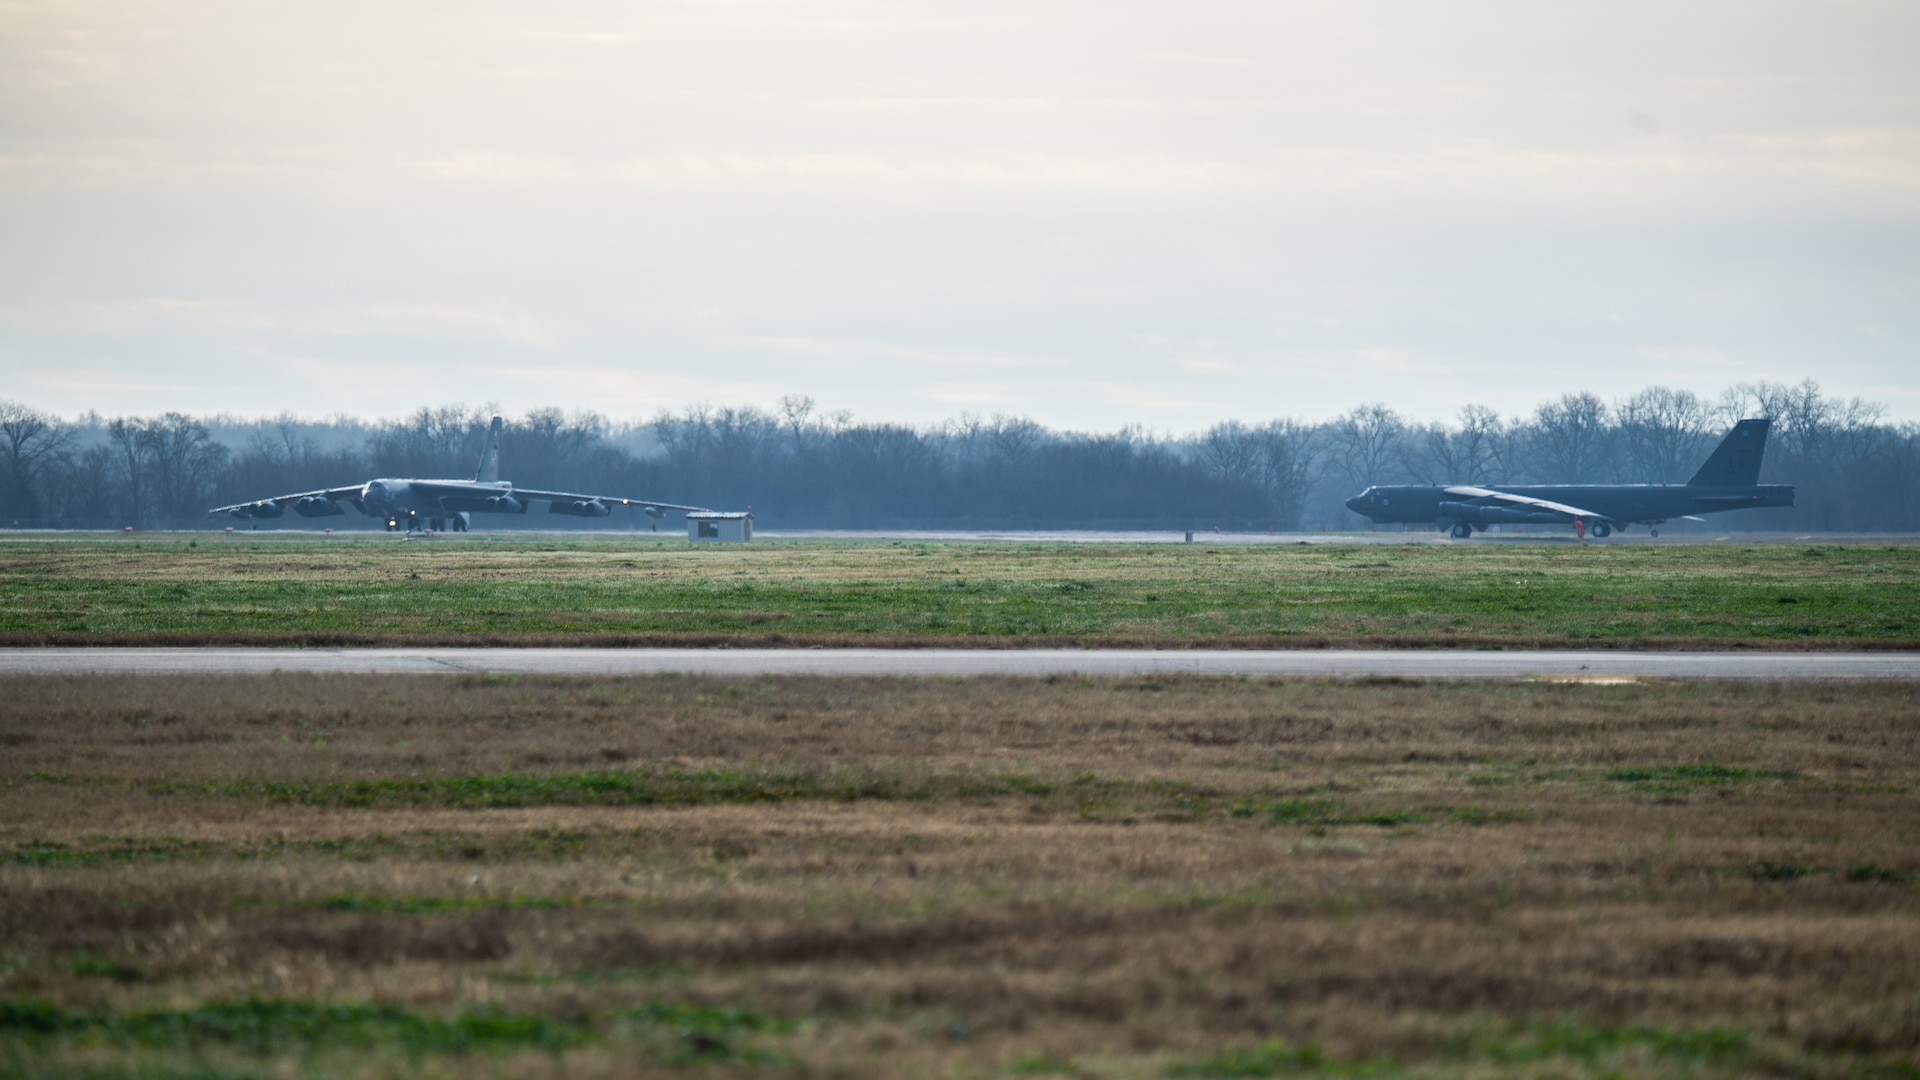 U.S. Air Force B-52 Stratofortress' take off from Barksdale Air Force Base, LA, during a bomber task force mission over the U.S. Central Command area of responsibility, Jan. 26, 2021. The bomber deployment underscores the U.S. Military's commitment to regional security and demonstrates a unique ability to rapidly deploy on short notice. The B-52 is a long-range, heavy bomber that is capable of flying at high subsonic speeds of altitudes of up to 50,000 feet and provides the United States with a global strike capability.(U.S. Air Force photo by  Airman 1st Class Jacob B. Wrightsman)